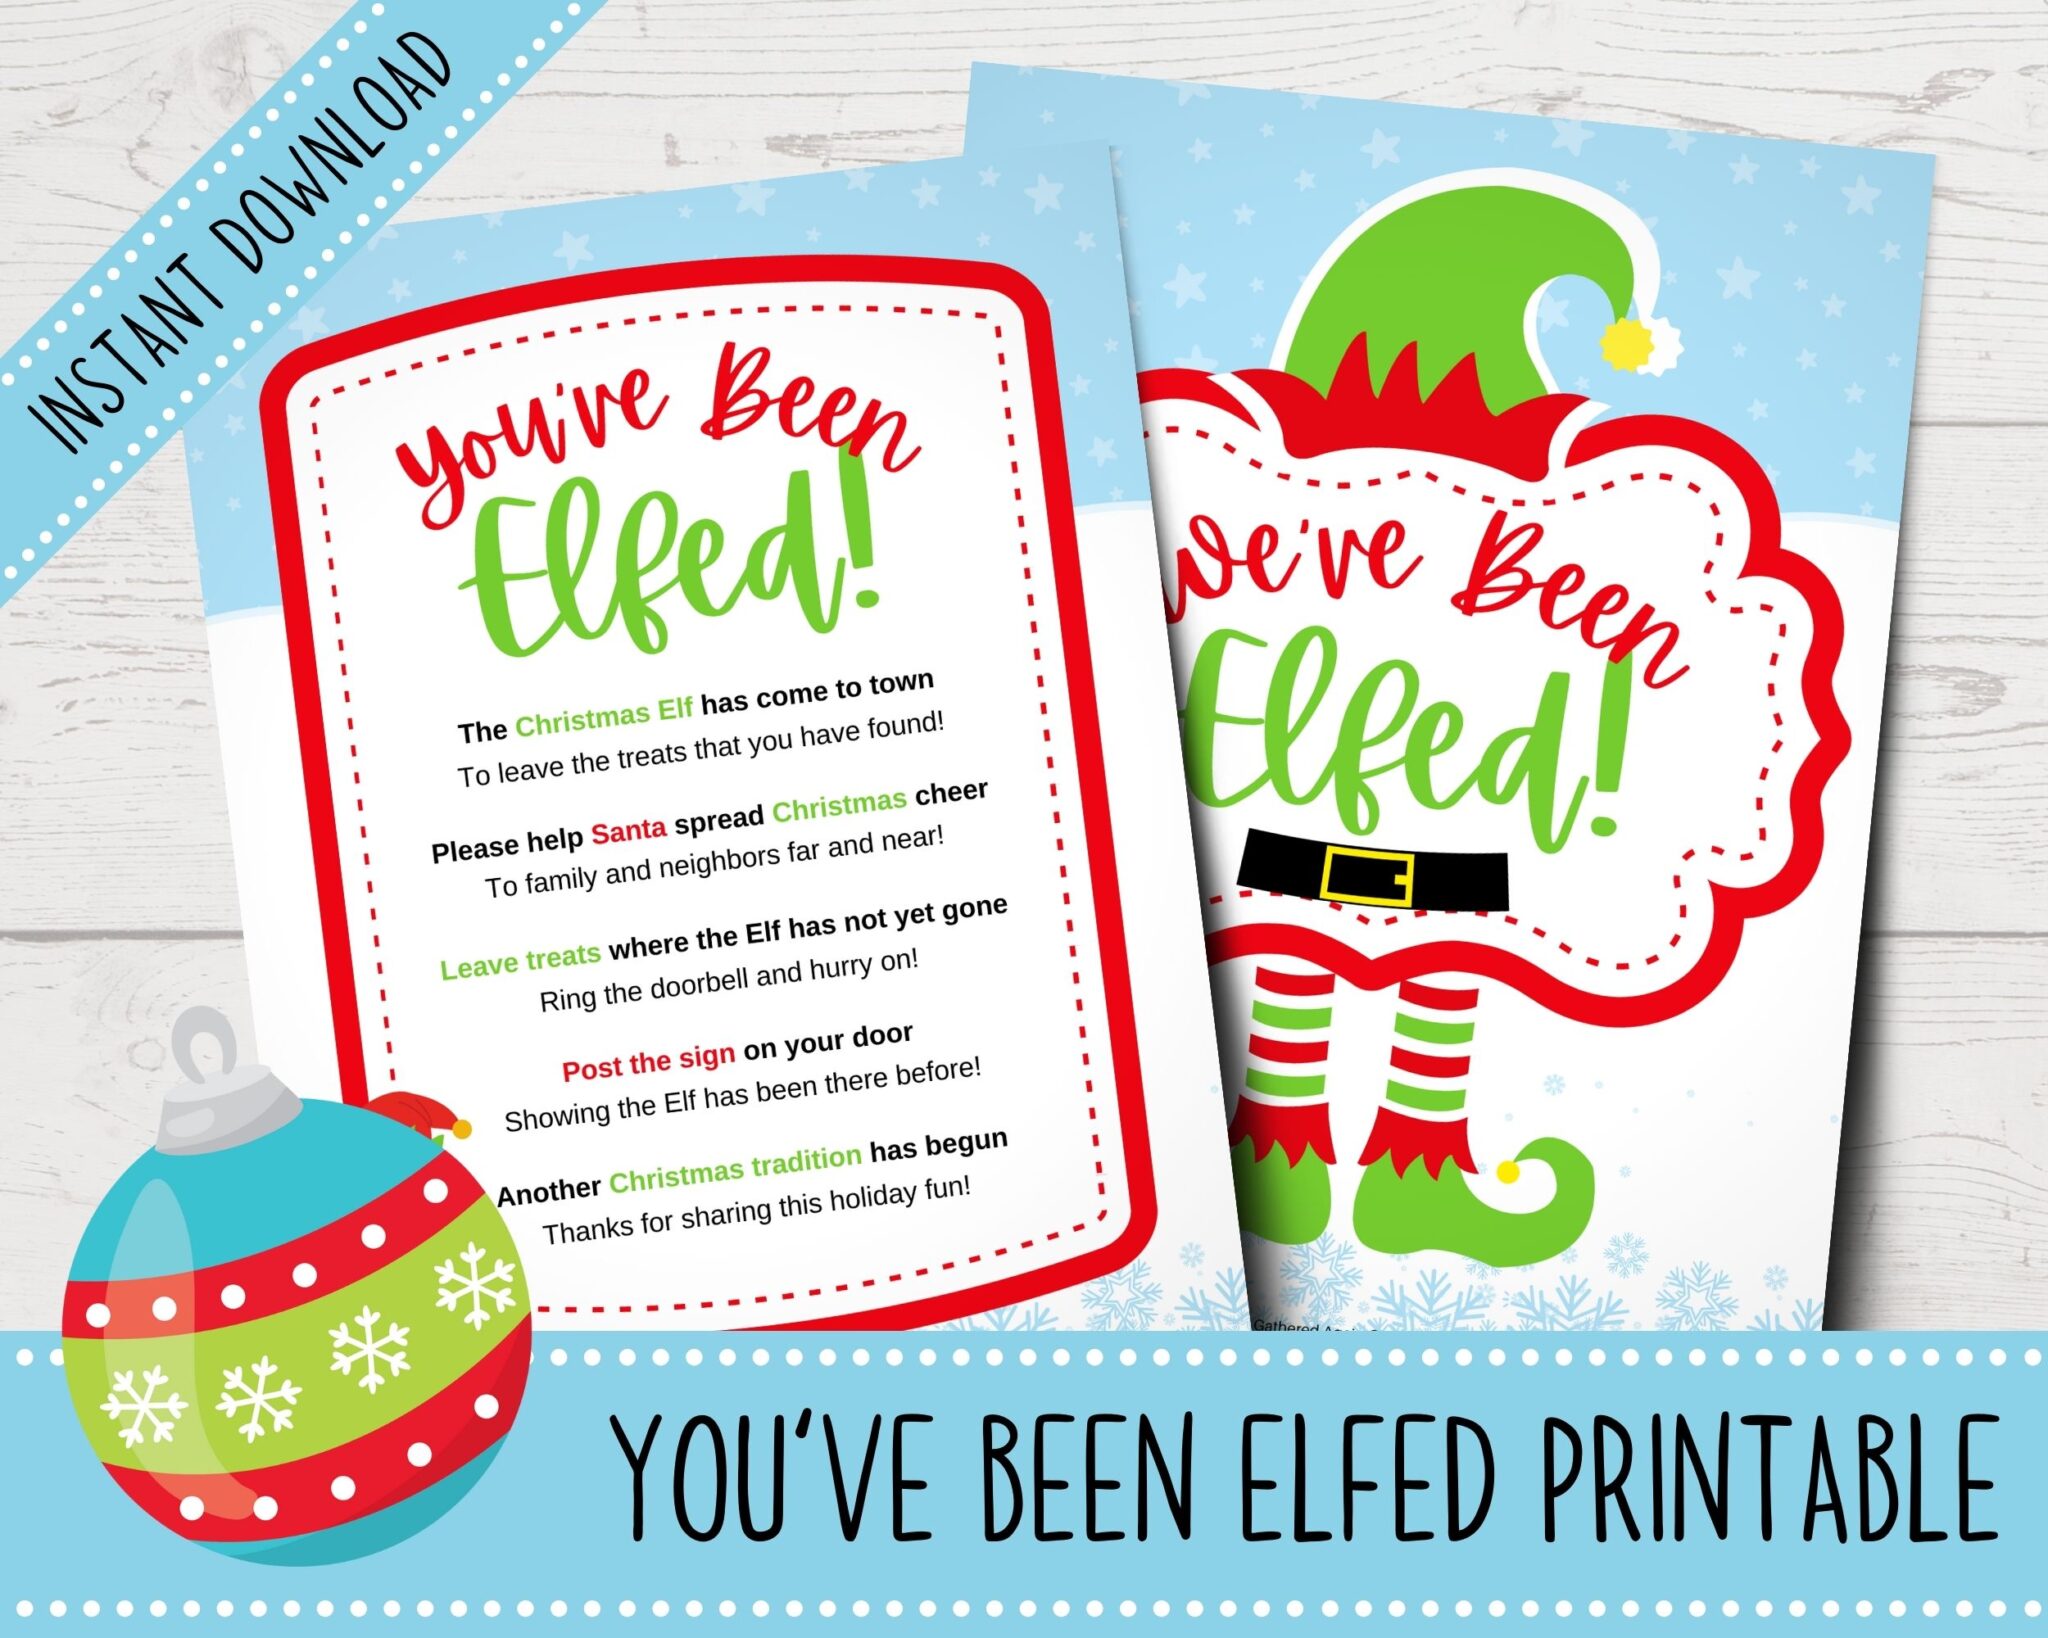 125-you-ve-been-elfed-gift-ideas